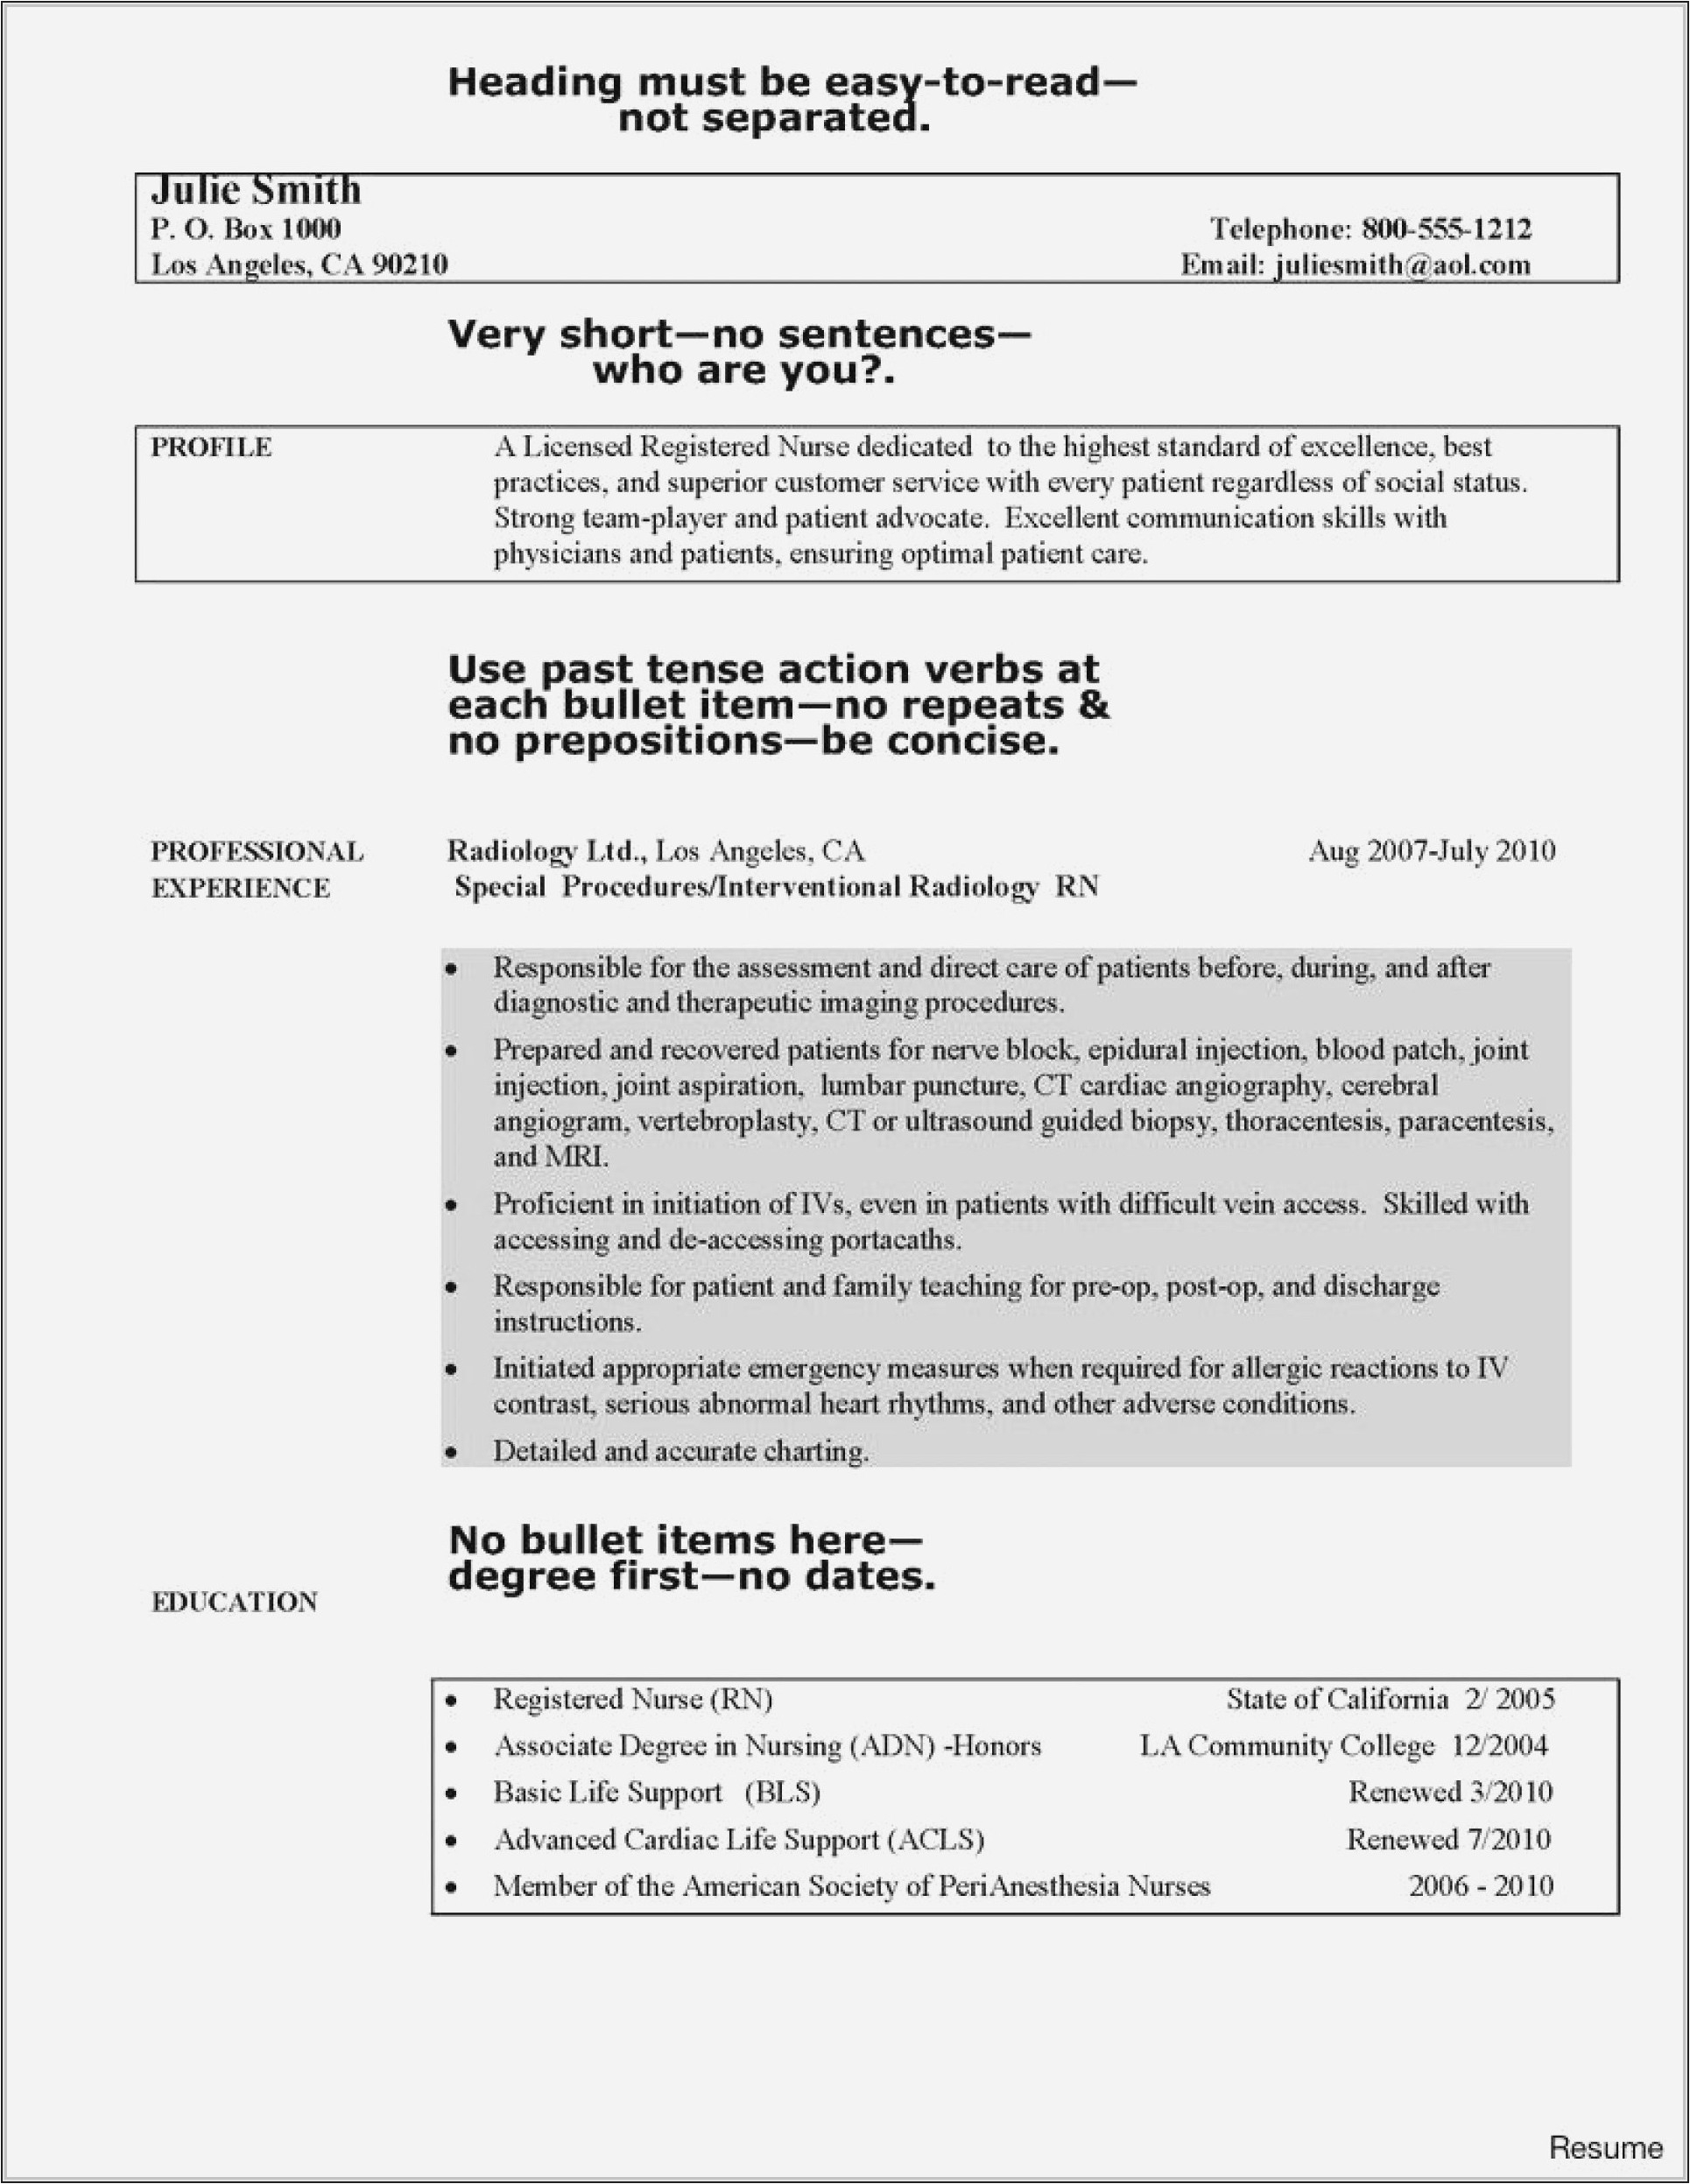 Sample Resume for Cna with Previous Experience Resume Sample for Cna with No Experience Uncategorized